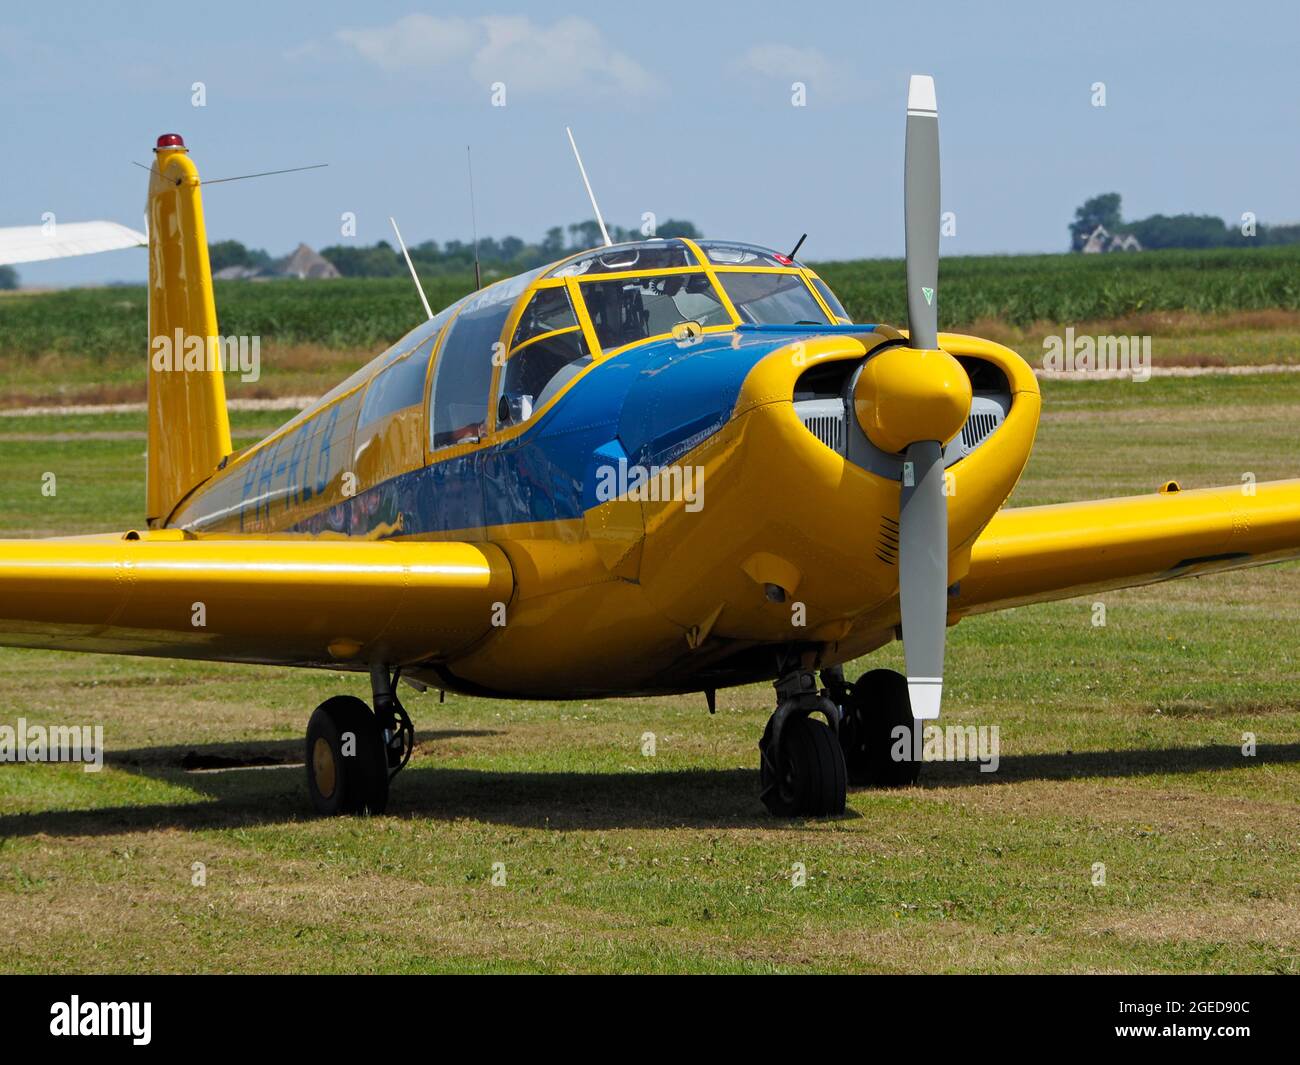 Classic propeller driven aeroplane on the ground at Texel island airfield, the Netherlands Stock Photo